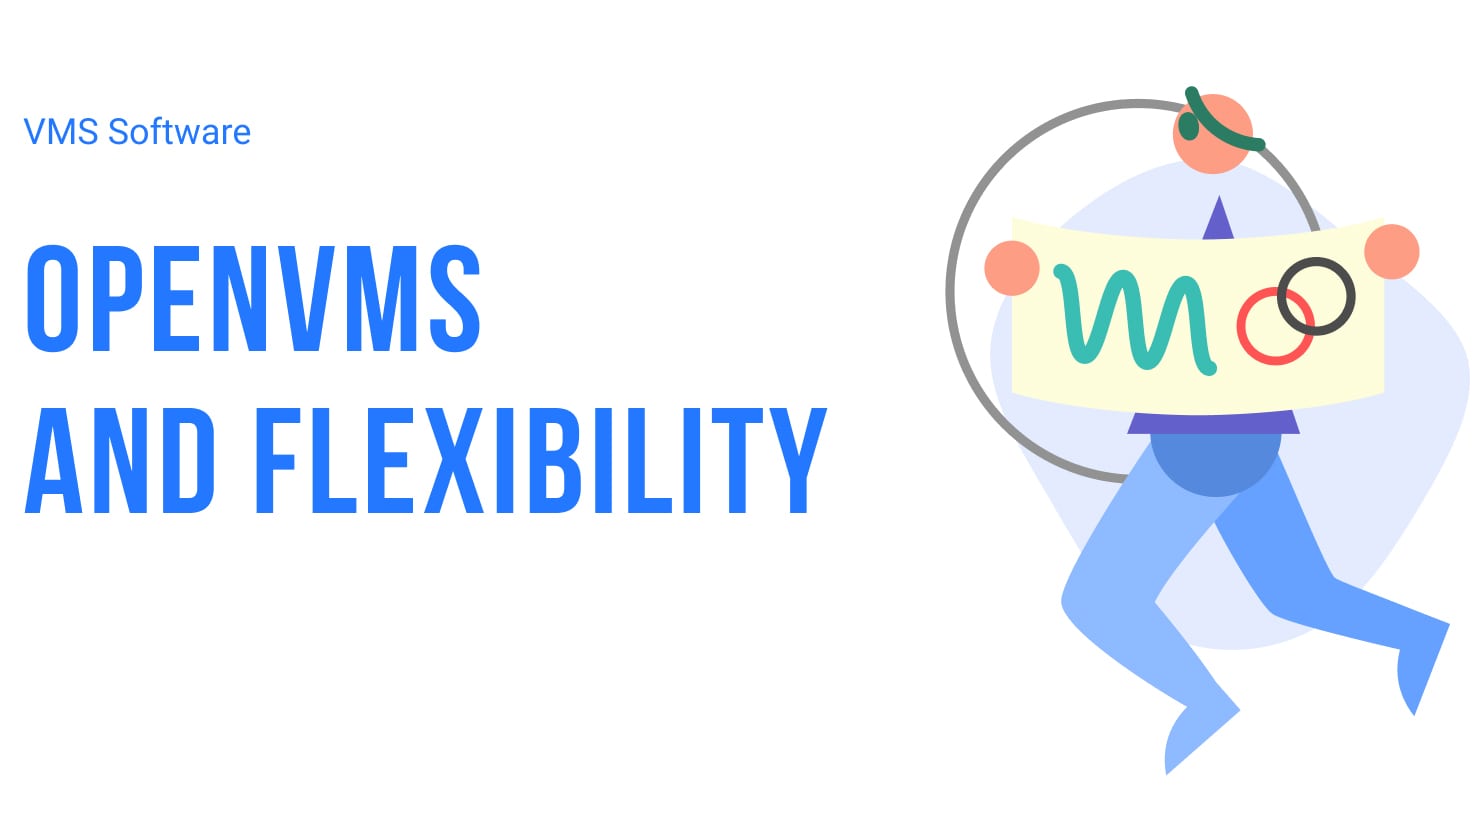 OpenVMS and Flexibility